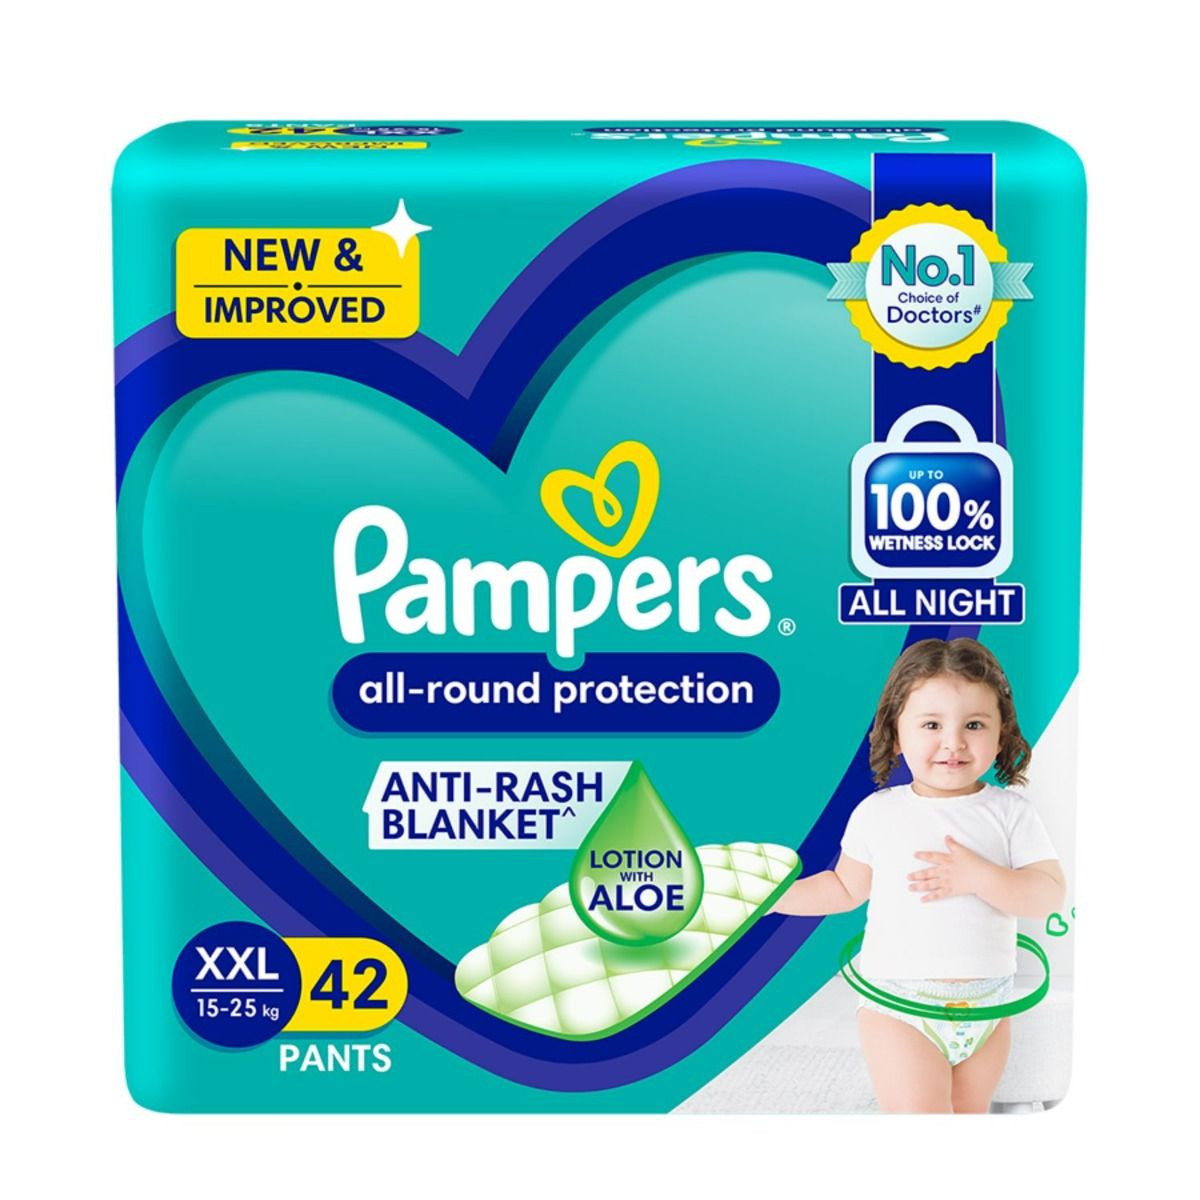 Buy Pampers All-Round Protection Diaper Pants XXL, 42 Count Online